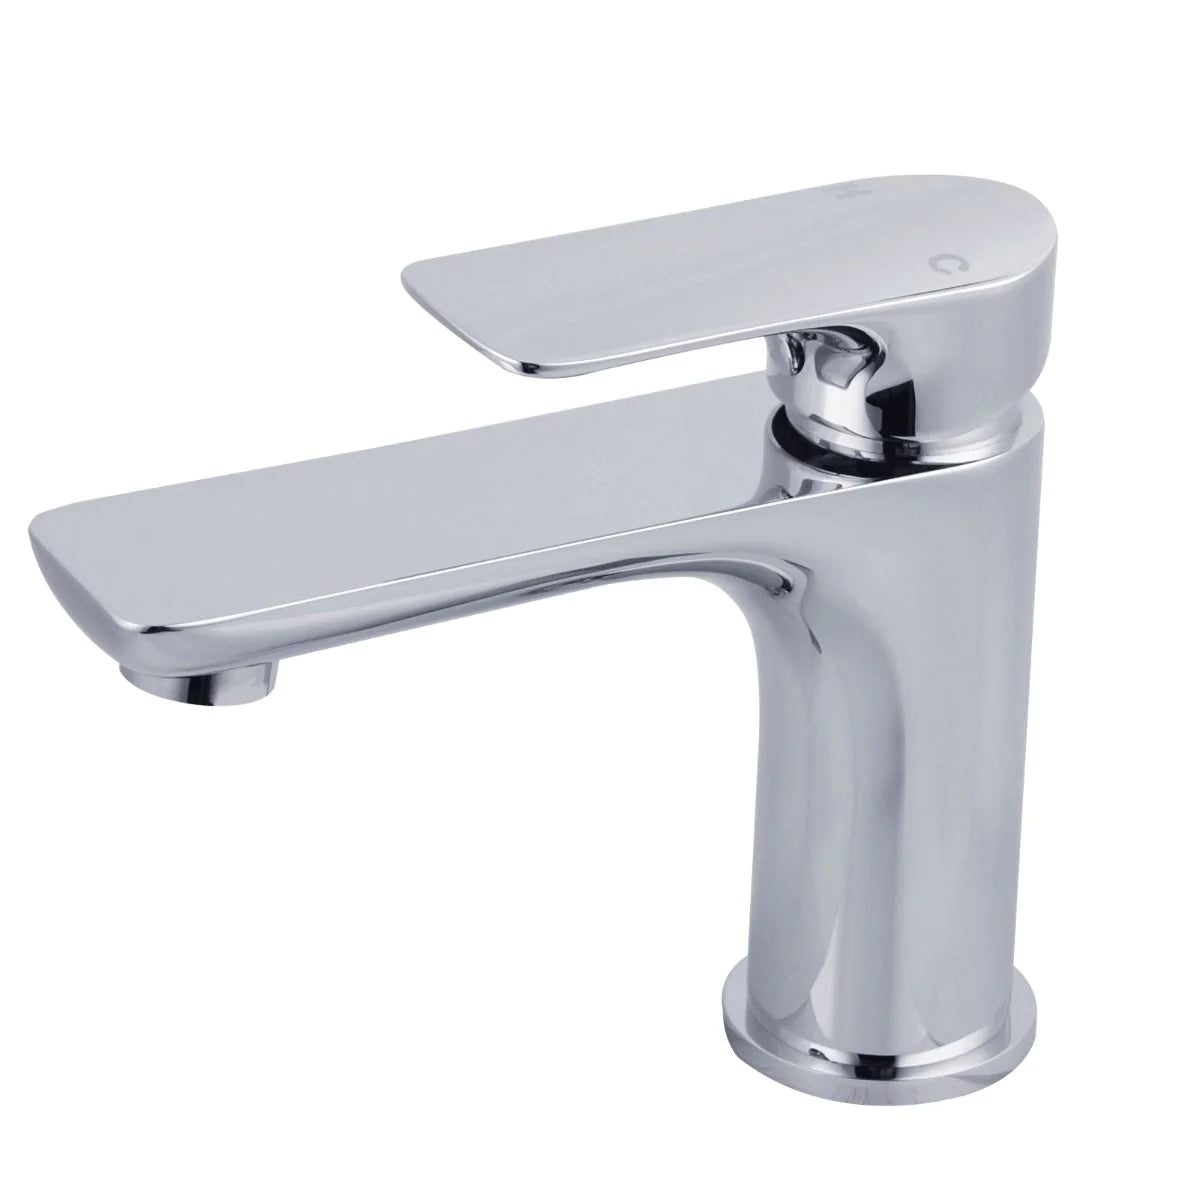 Vog Series: Stylish basin mixer tap, ideal for modern bathrooms-CH0131.BM